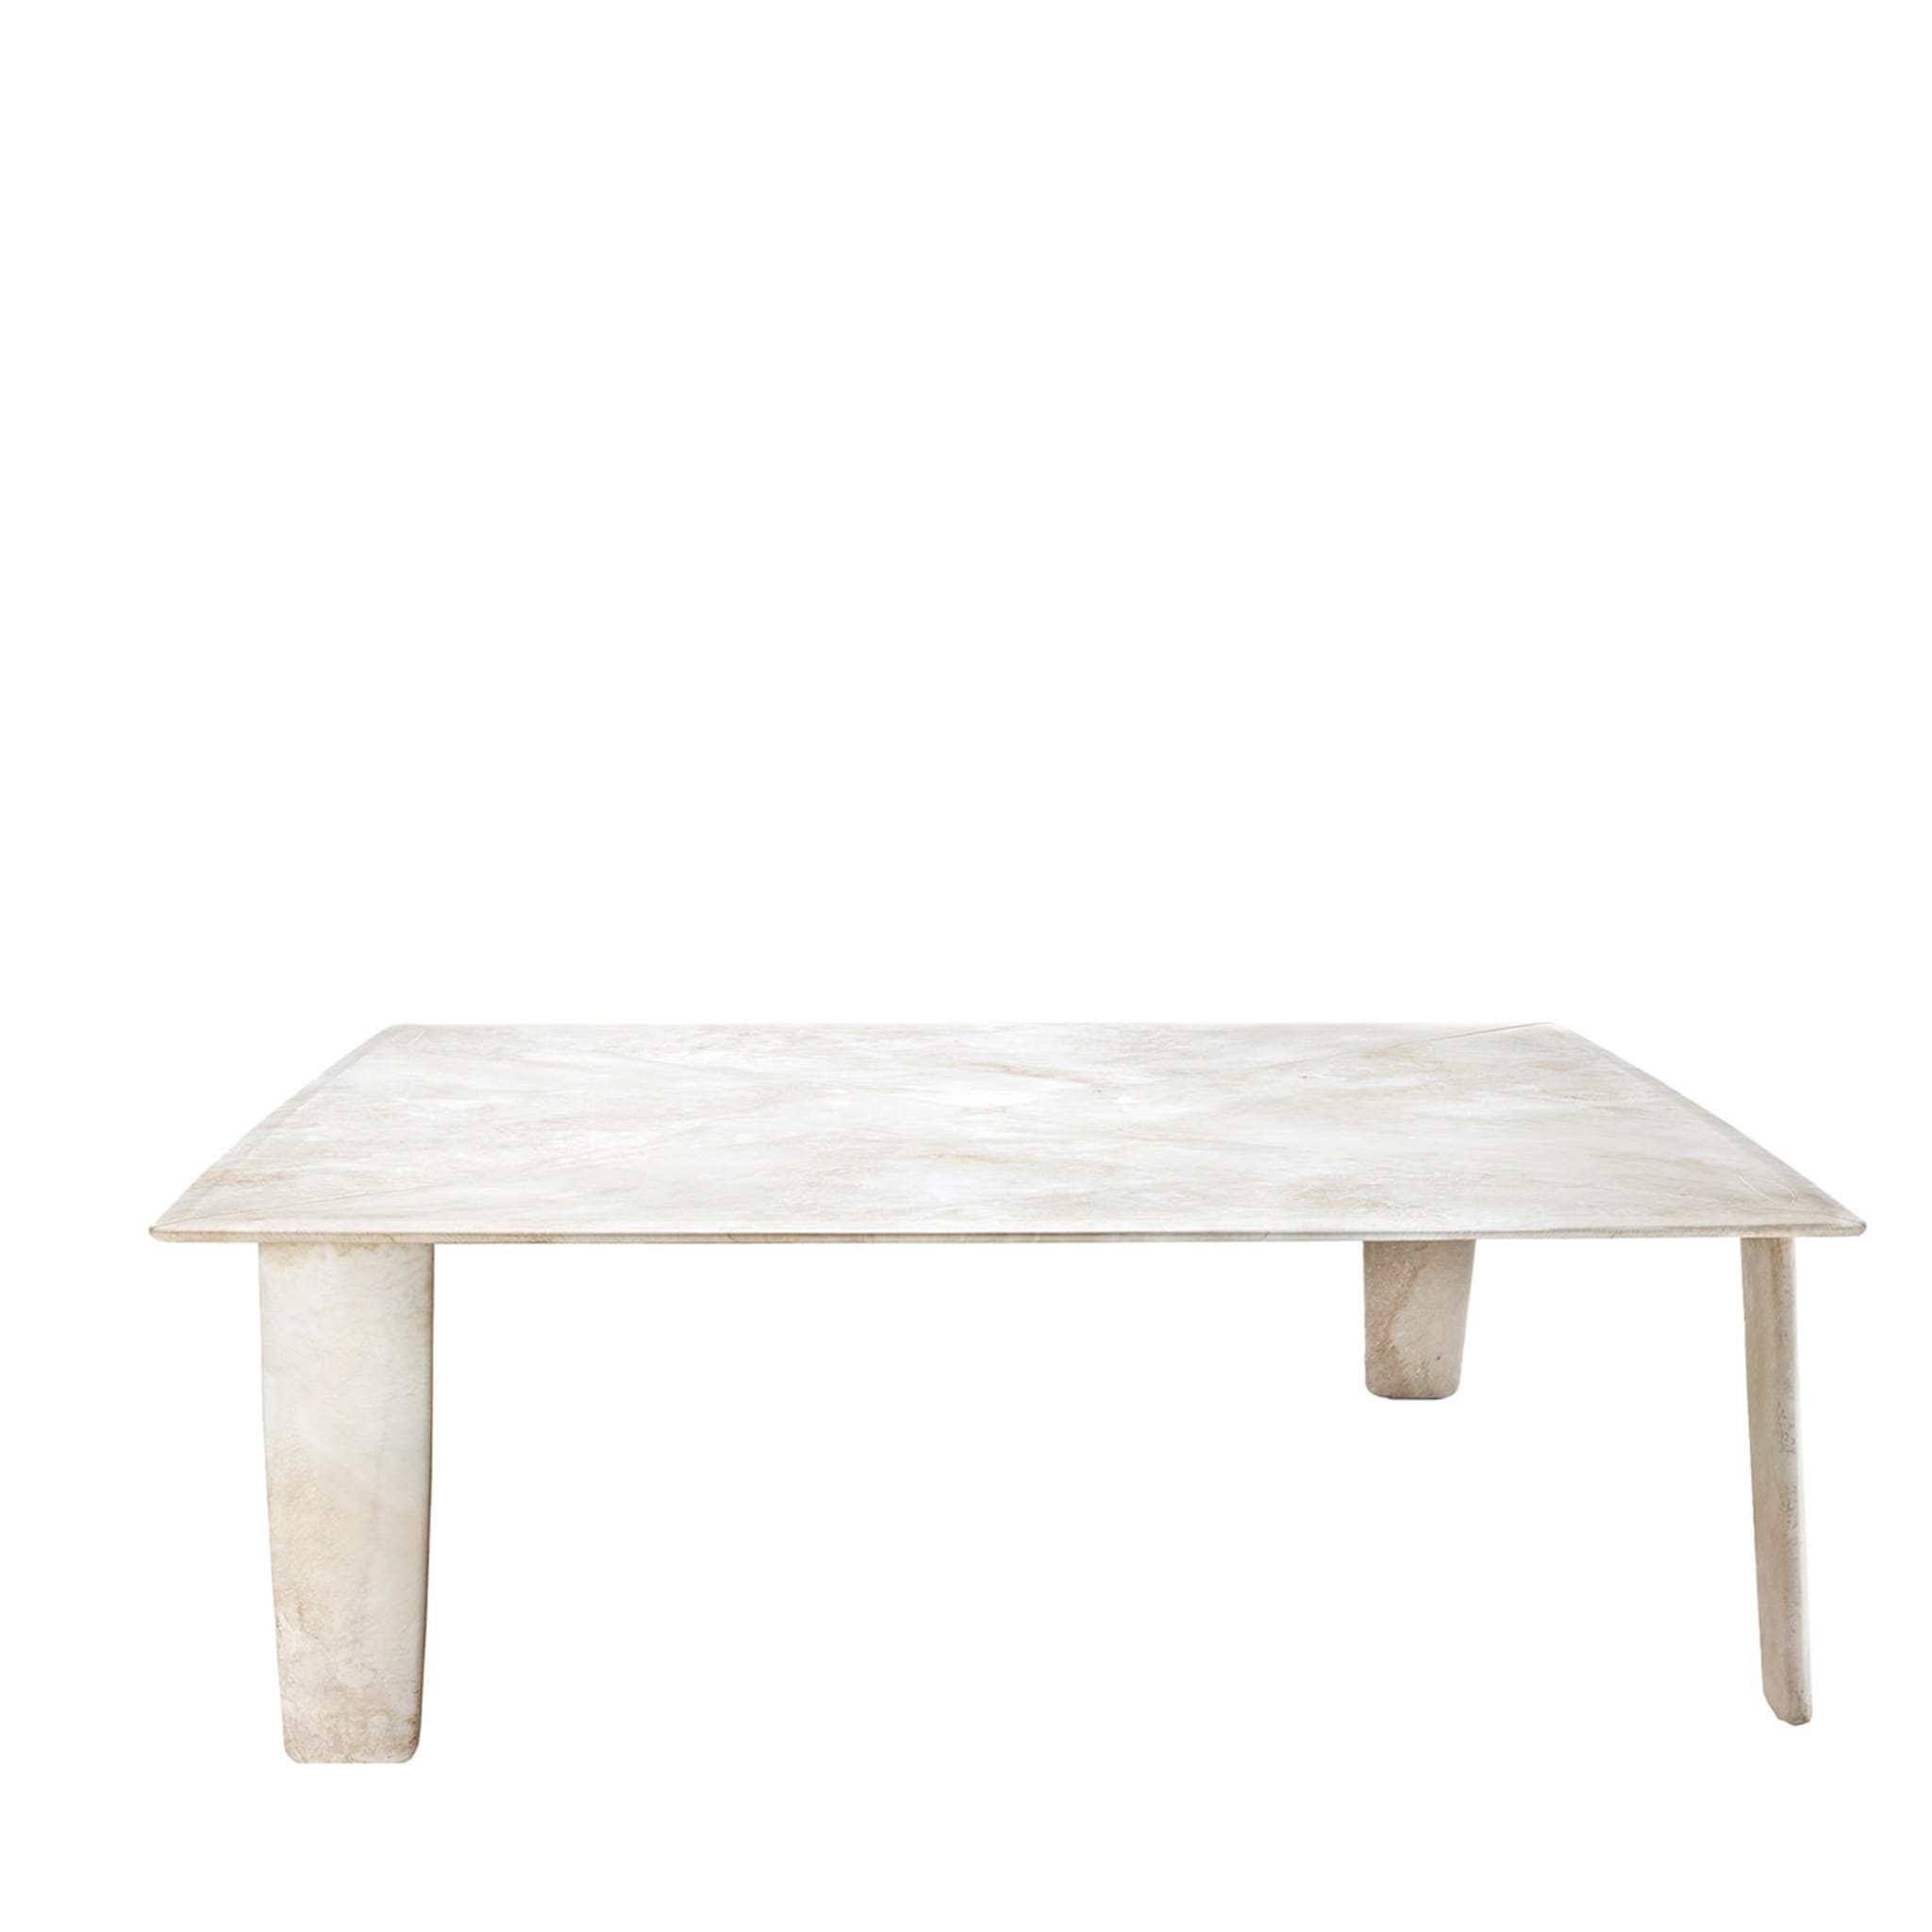 Biscuit Square Ostuni Table by Massimo Castagna - Main view